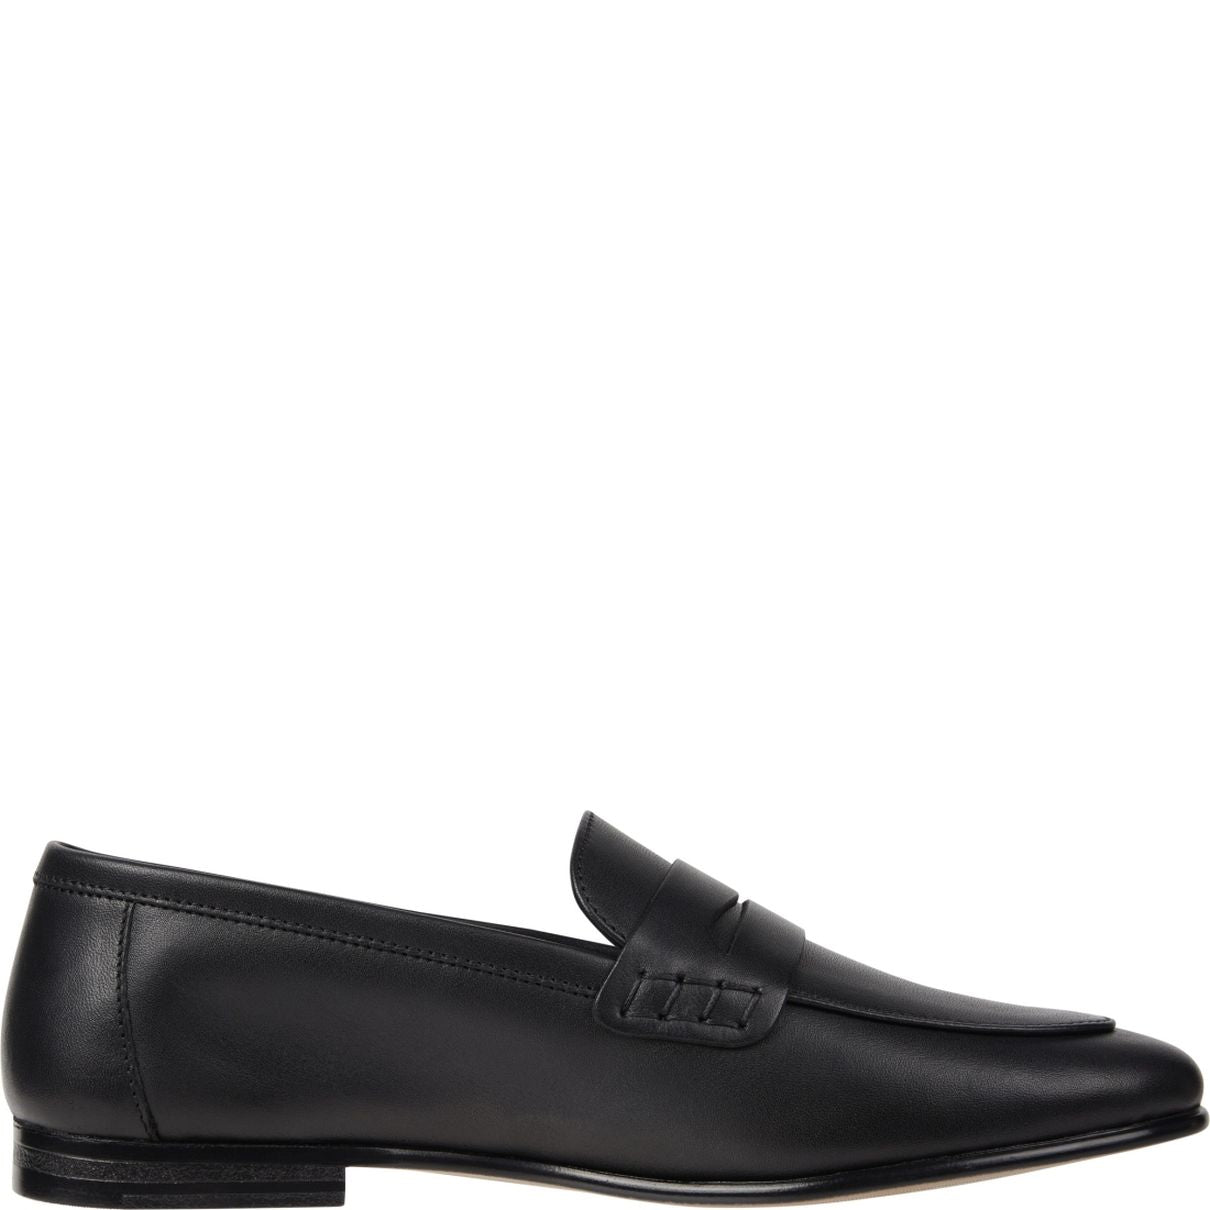 TOMMY HILFIGER loafer tipo bateliai moterims, Juoda, Essential loafer